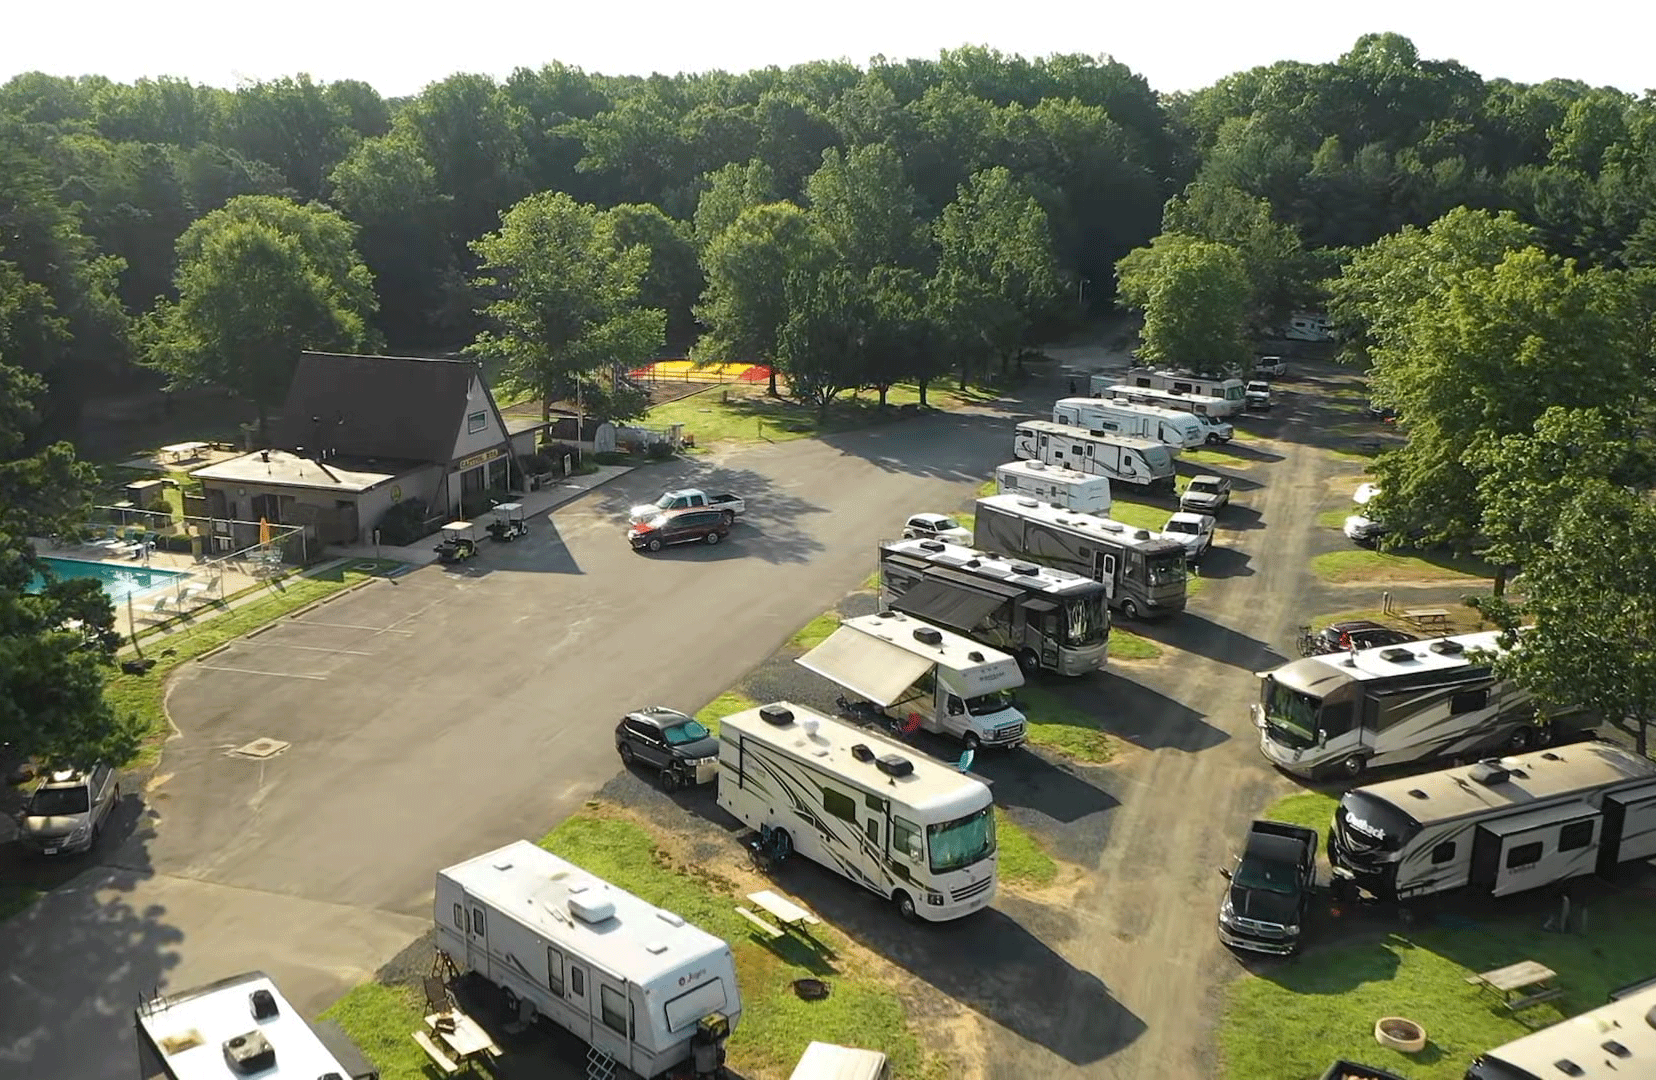 The Best Campgrounds and RV Parks near Washington DC